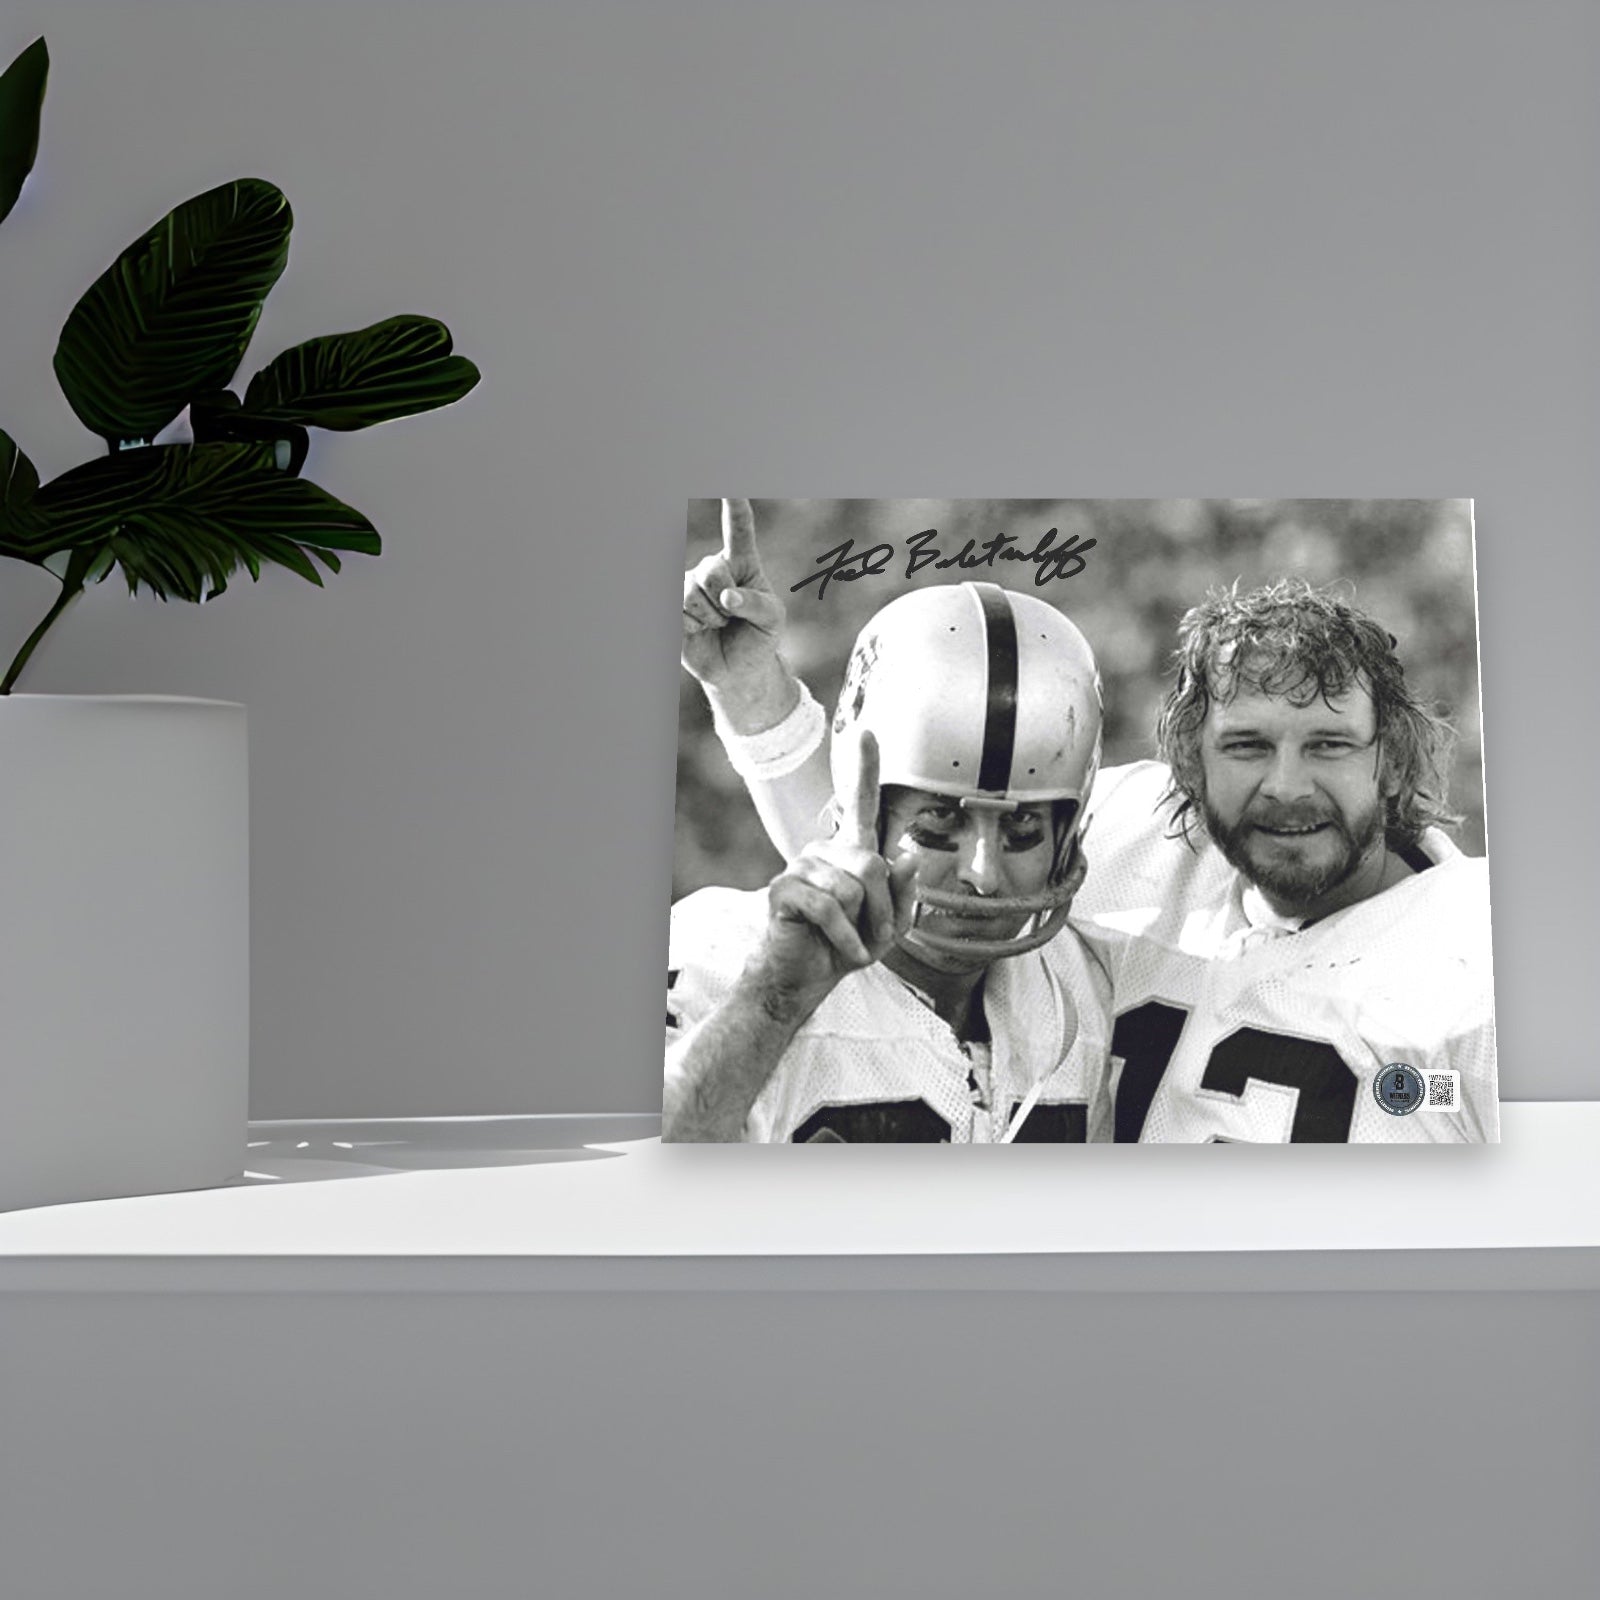 Introducing the Oakland Raiders Fred Biletnikoff and Ken Stabler Together 8x10 Photograph. Hand signed by Fred Biletnikoff, and certified by Beckets. As if one legendary Raider player wasn't enough, this photograph captures two of the greatest players in team history in one flawless shot.